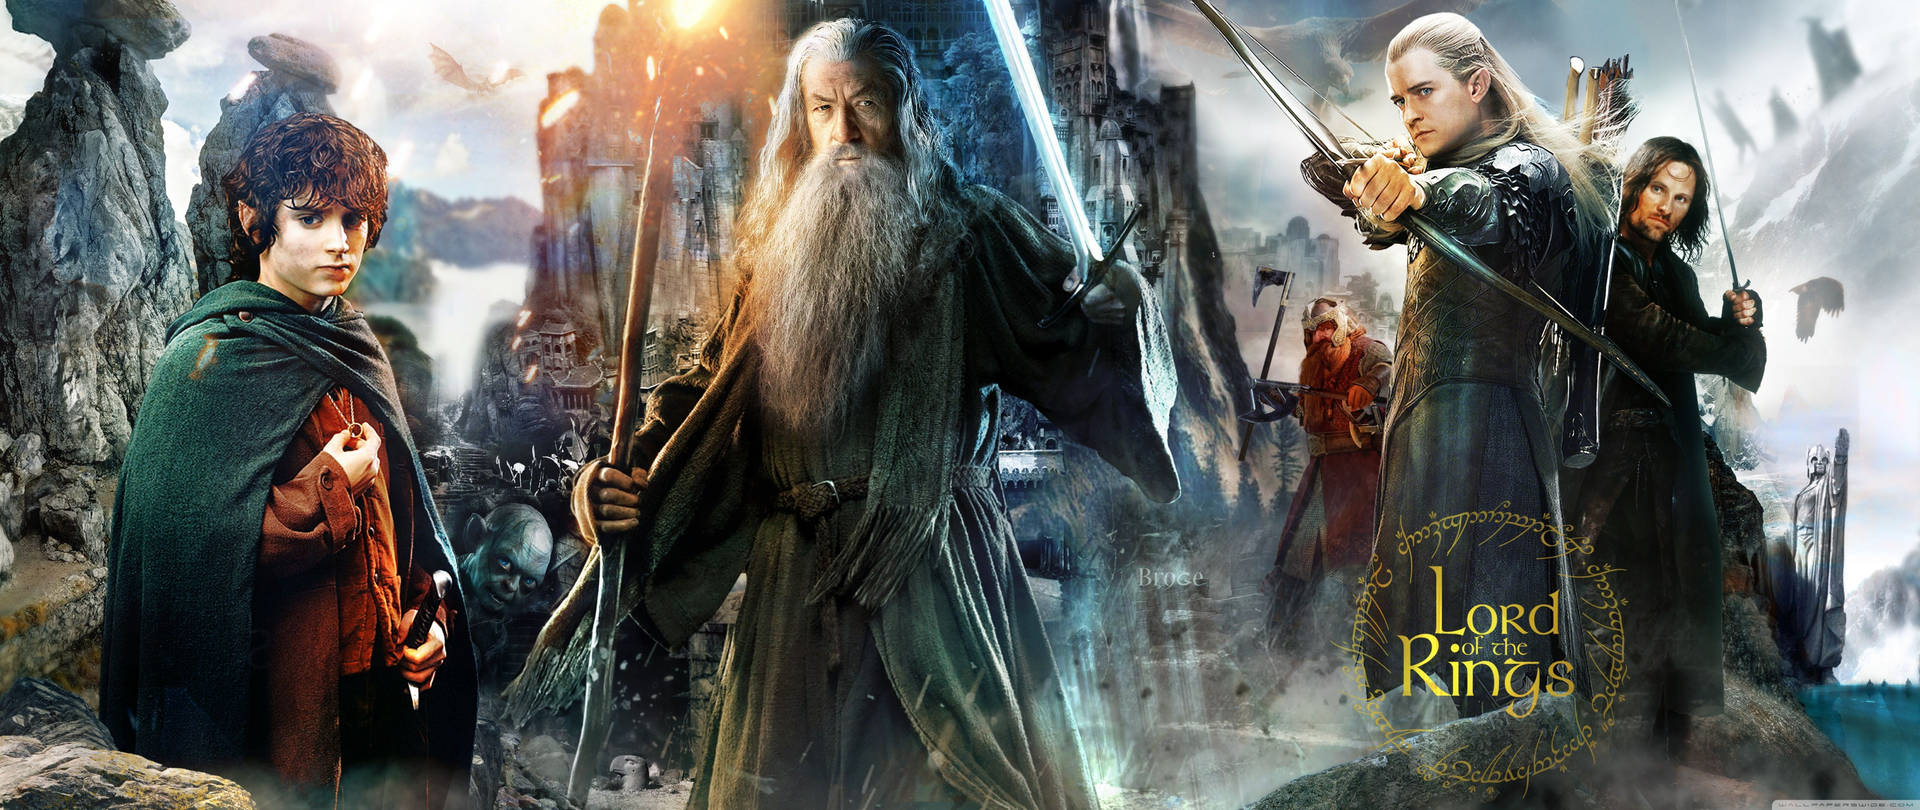 The Lord Of The Rings Movie Poster Wallpaper